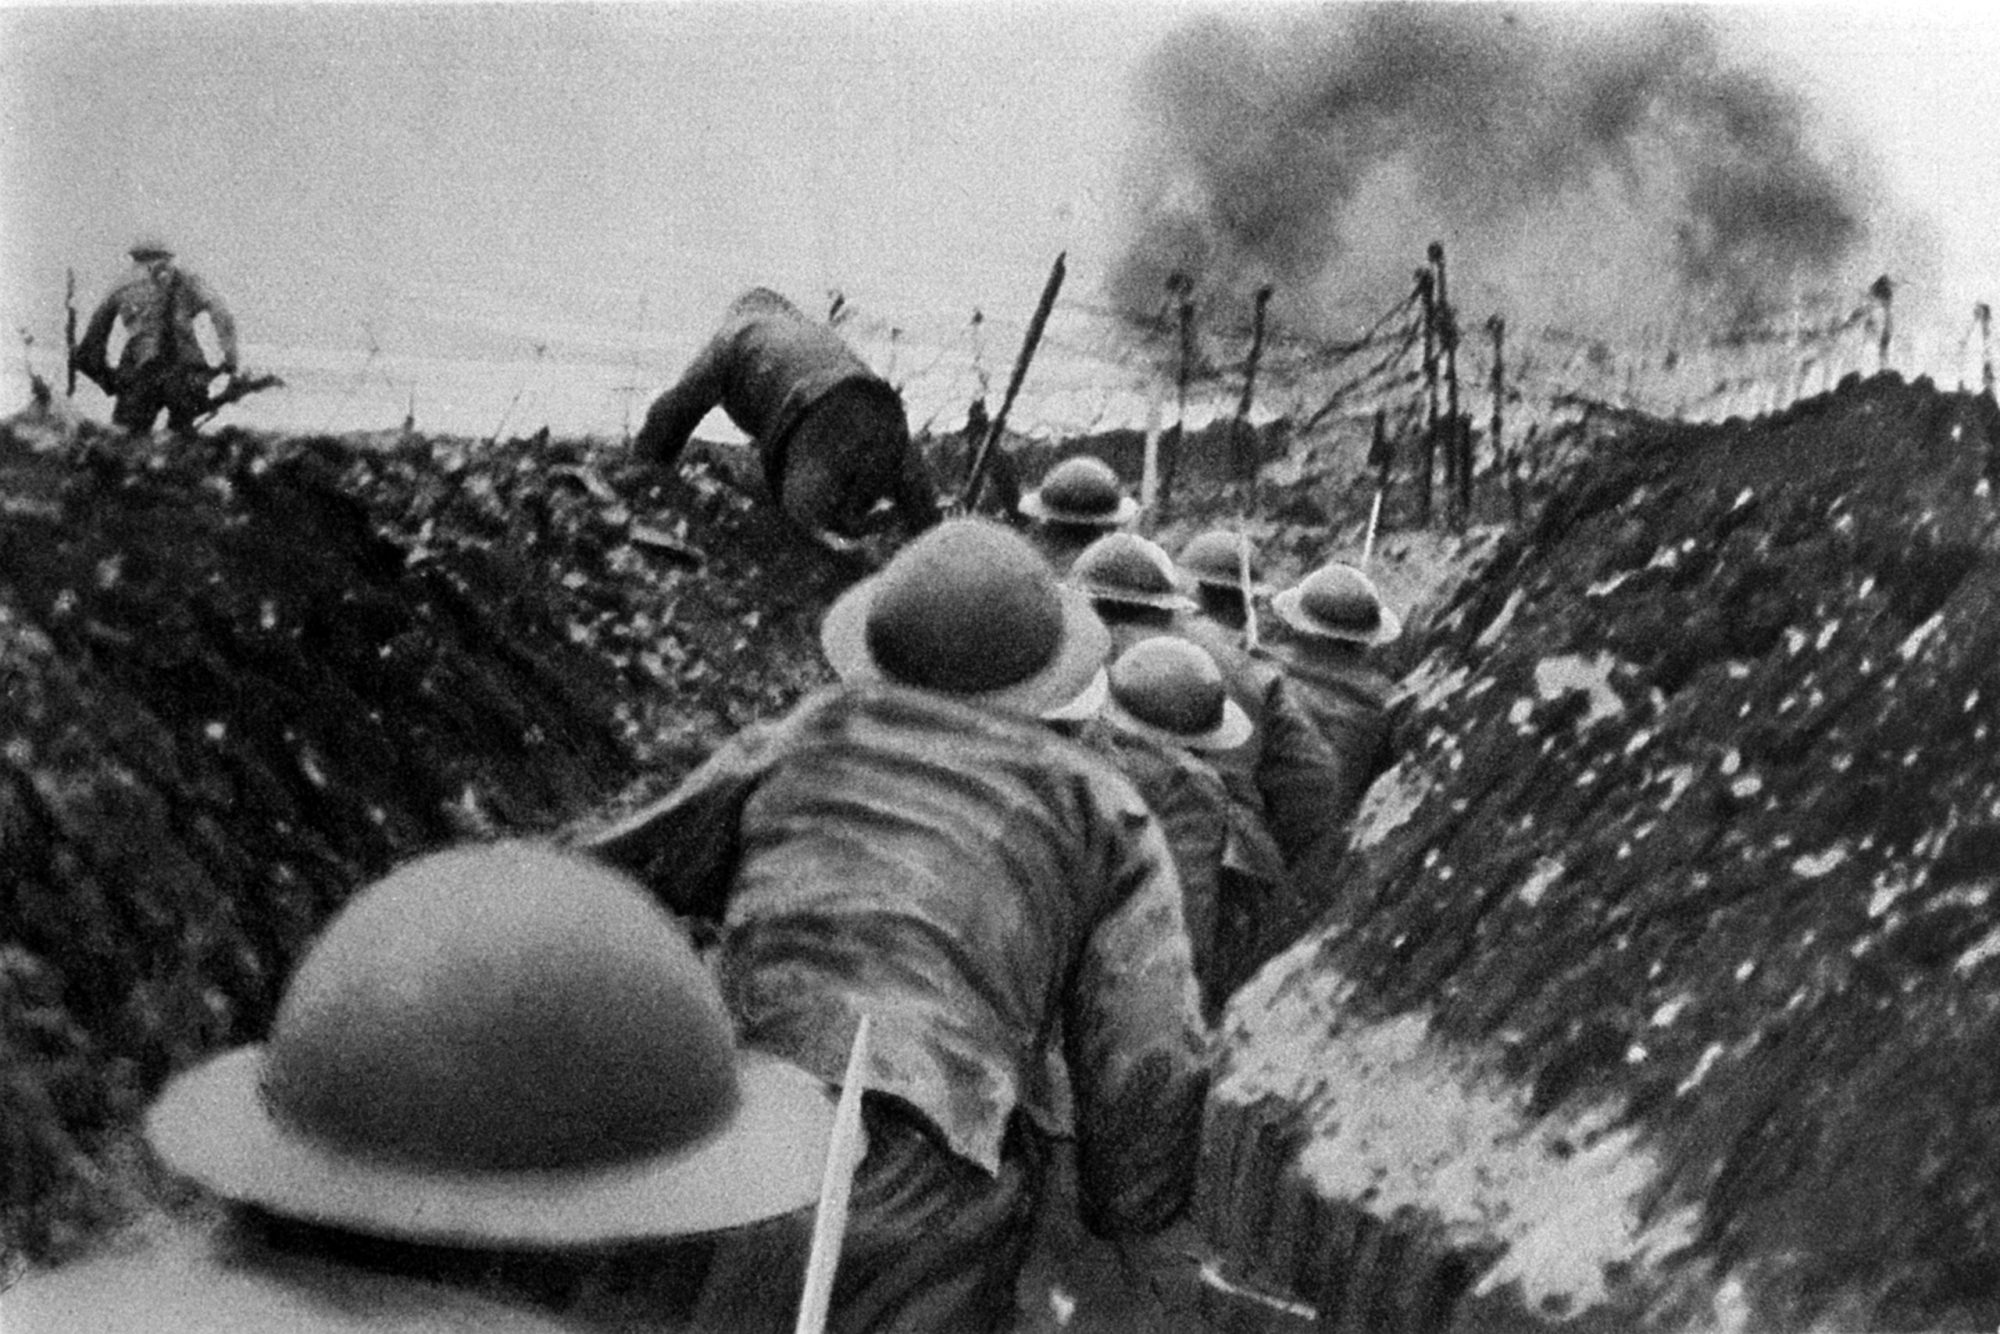 First World War: Soldiers of the English infantry in France, running out of their trenches at the signal to assault. Somme, France, 1916.